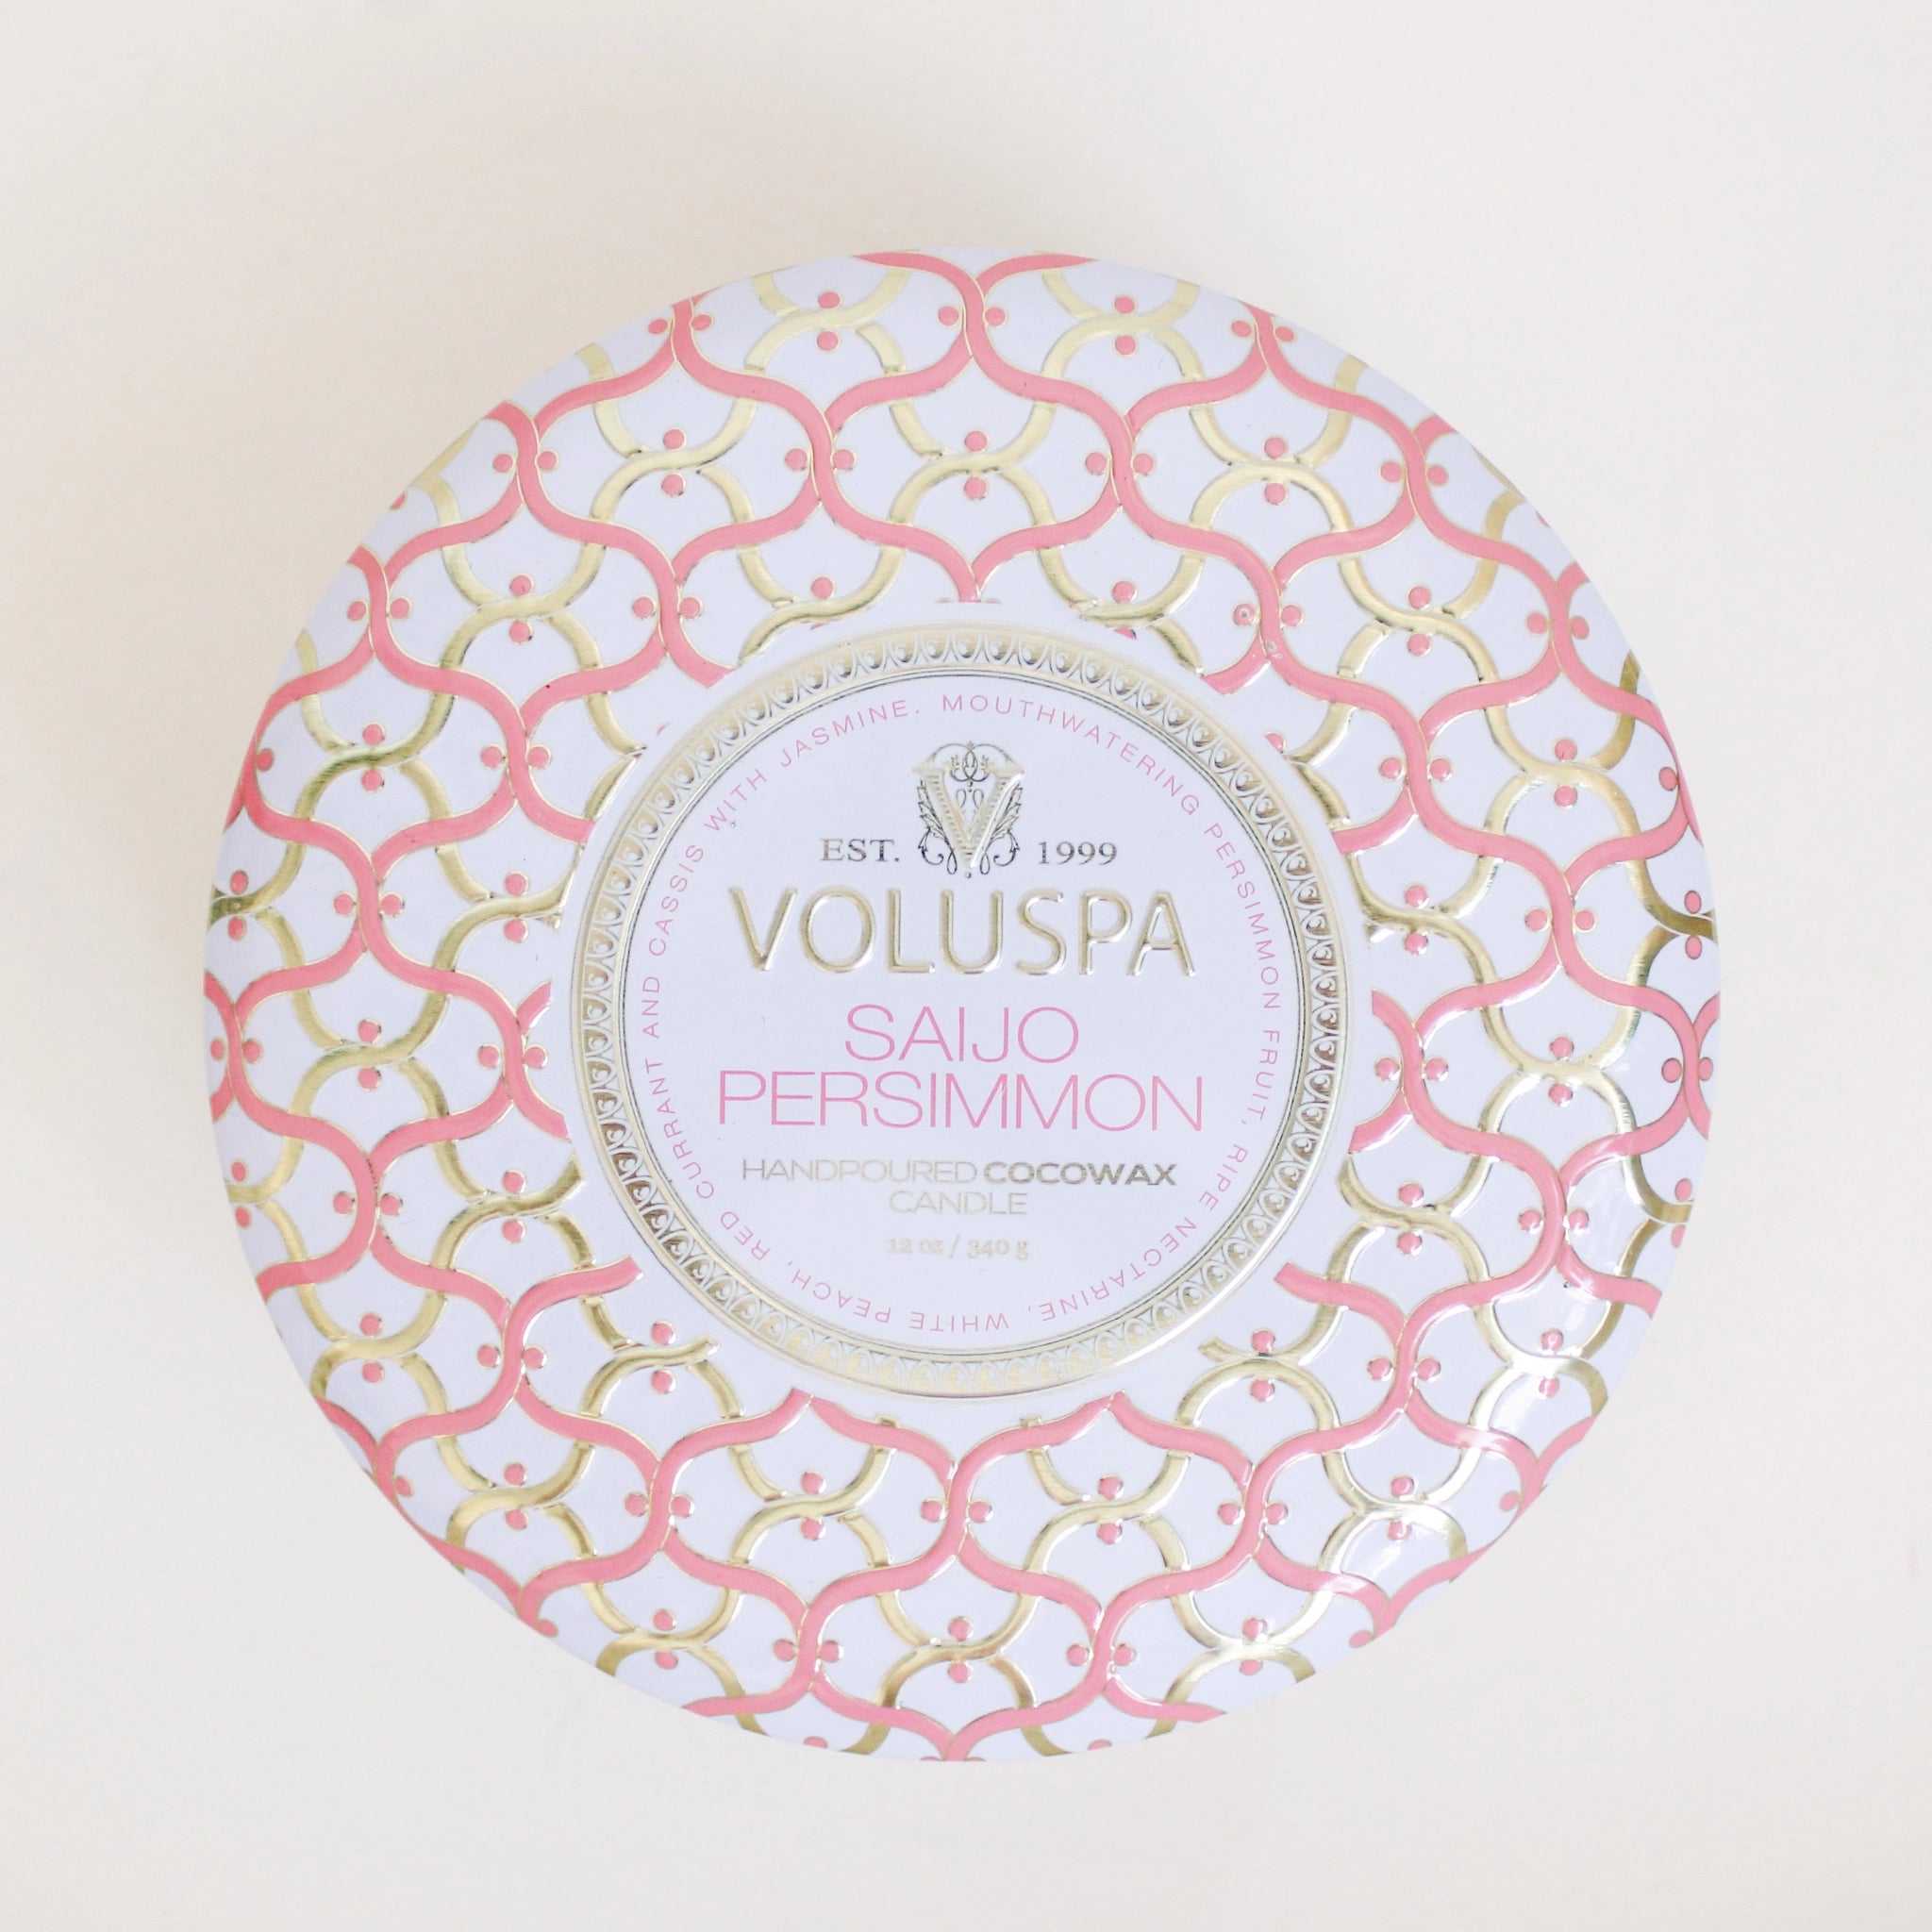 Birds eye view of the top of a round tin candle. The lid is white with pink and gold swirly lines on it. In the middle is a white circle with gold text that reads ‘voluspa.’ Below is pink text that reads ‘saijo persimmon.'